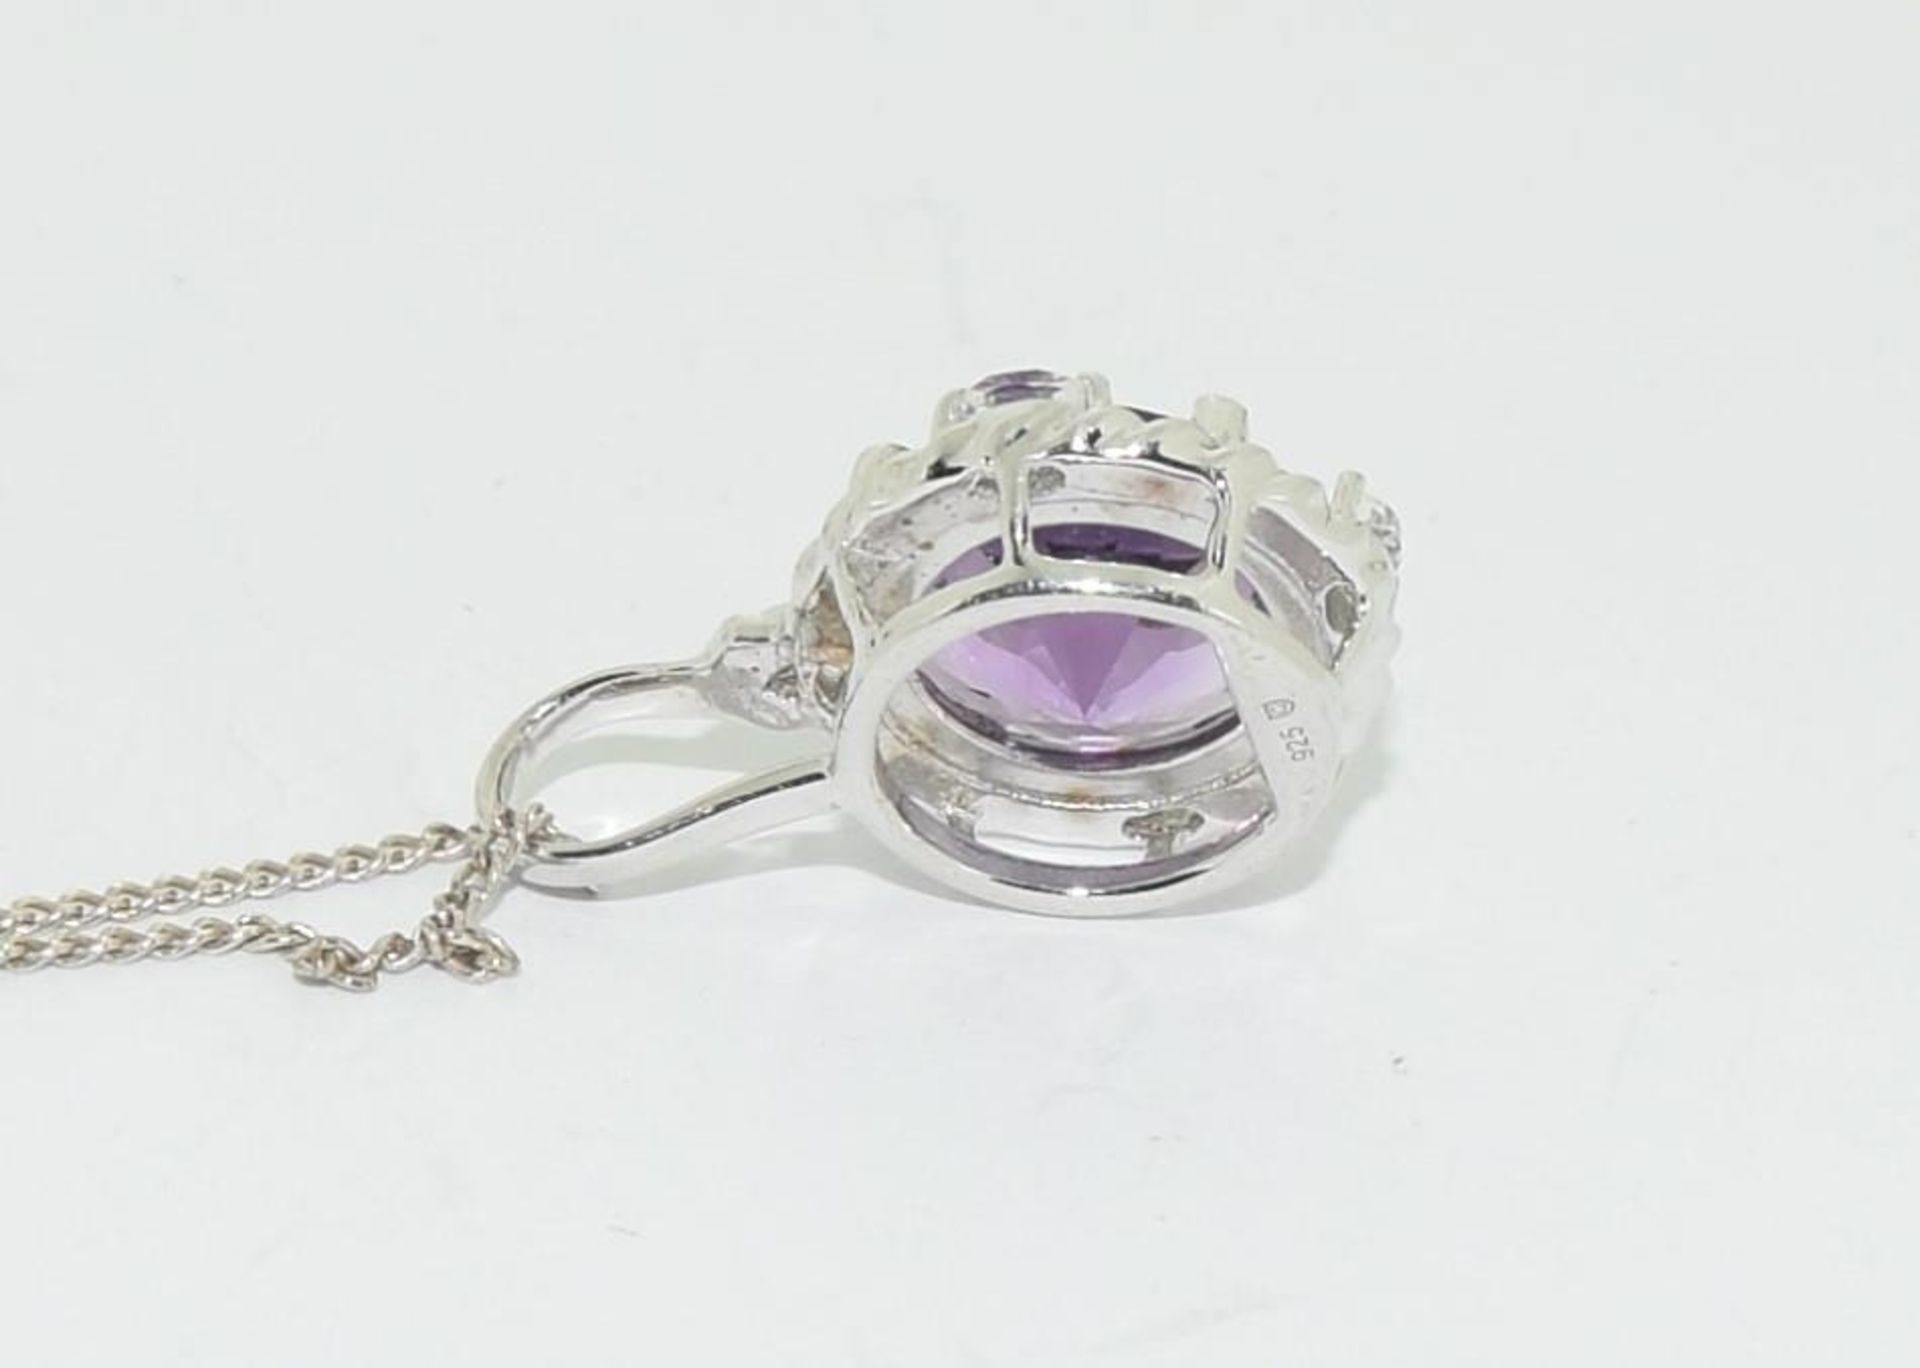 Victorian inspired amethyst 925 solitaire pendant. - Image 3 of 3